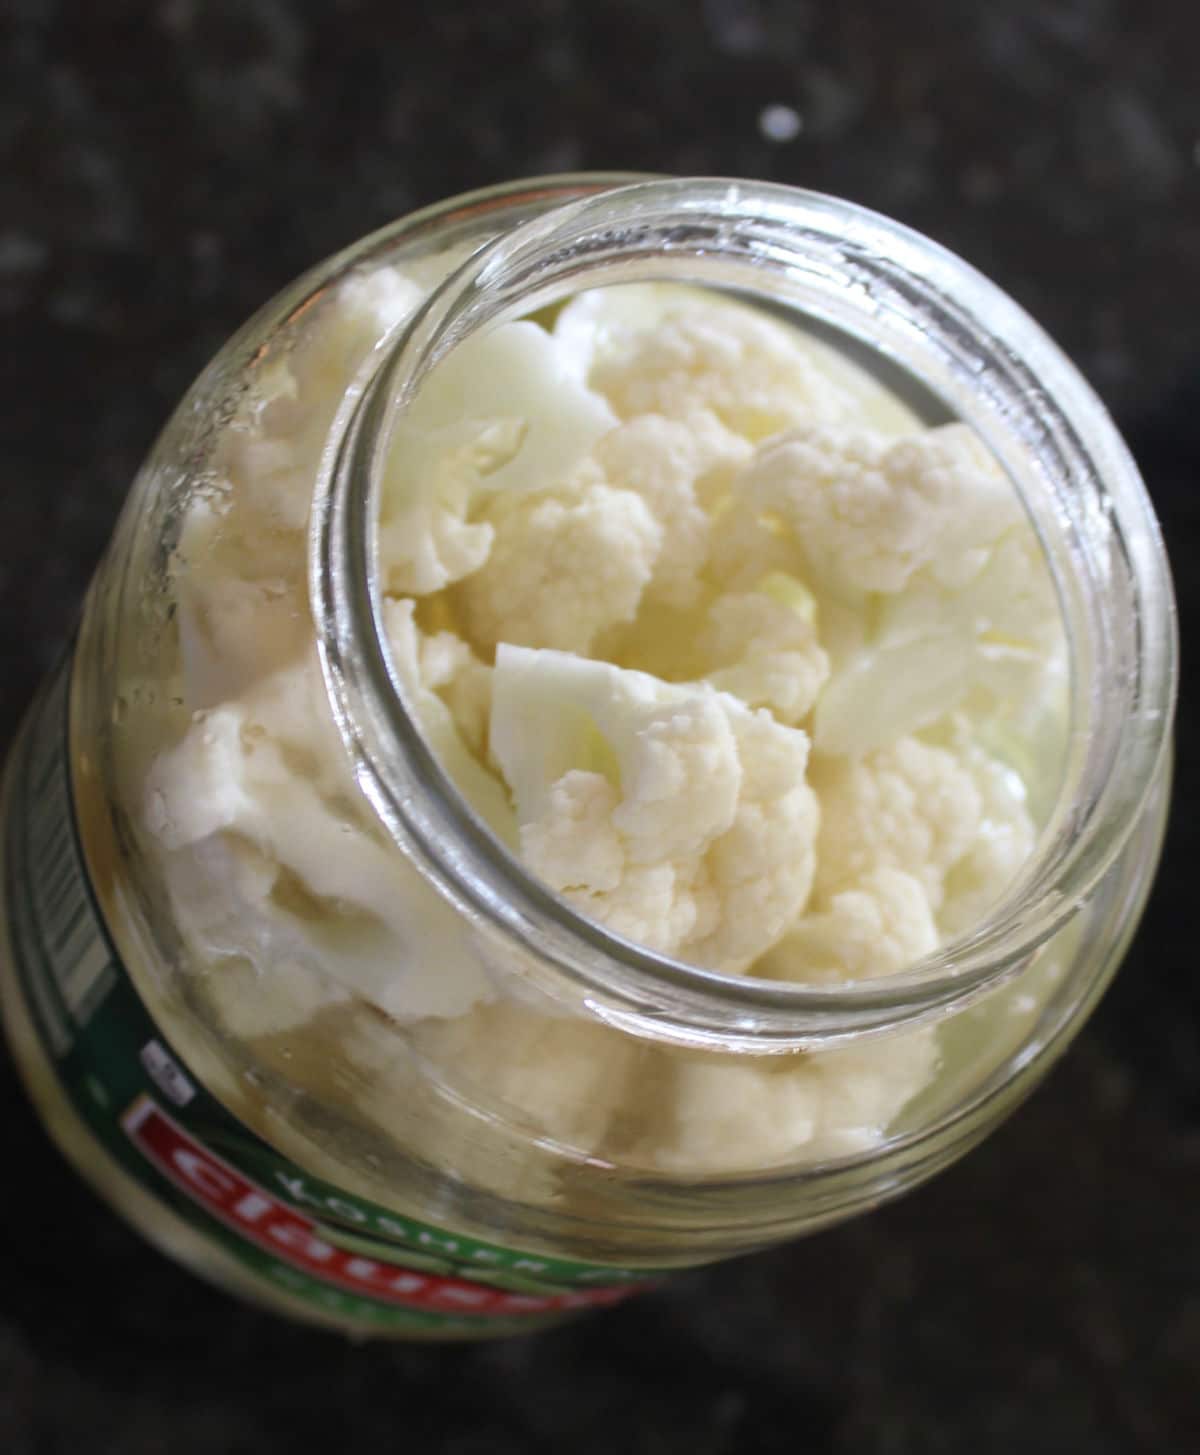 cauliflower in a used pickle container